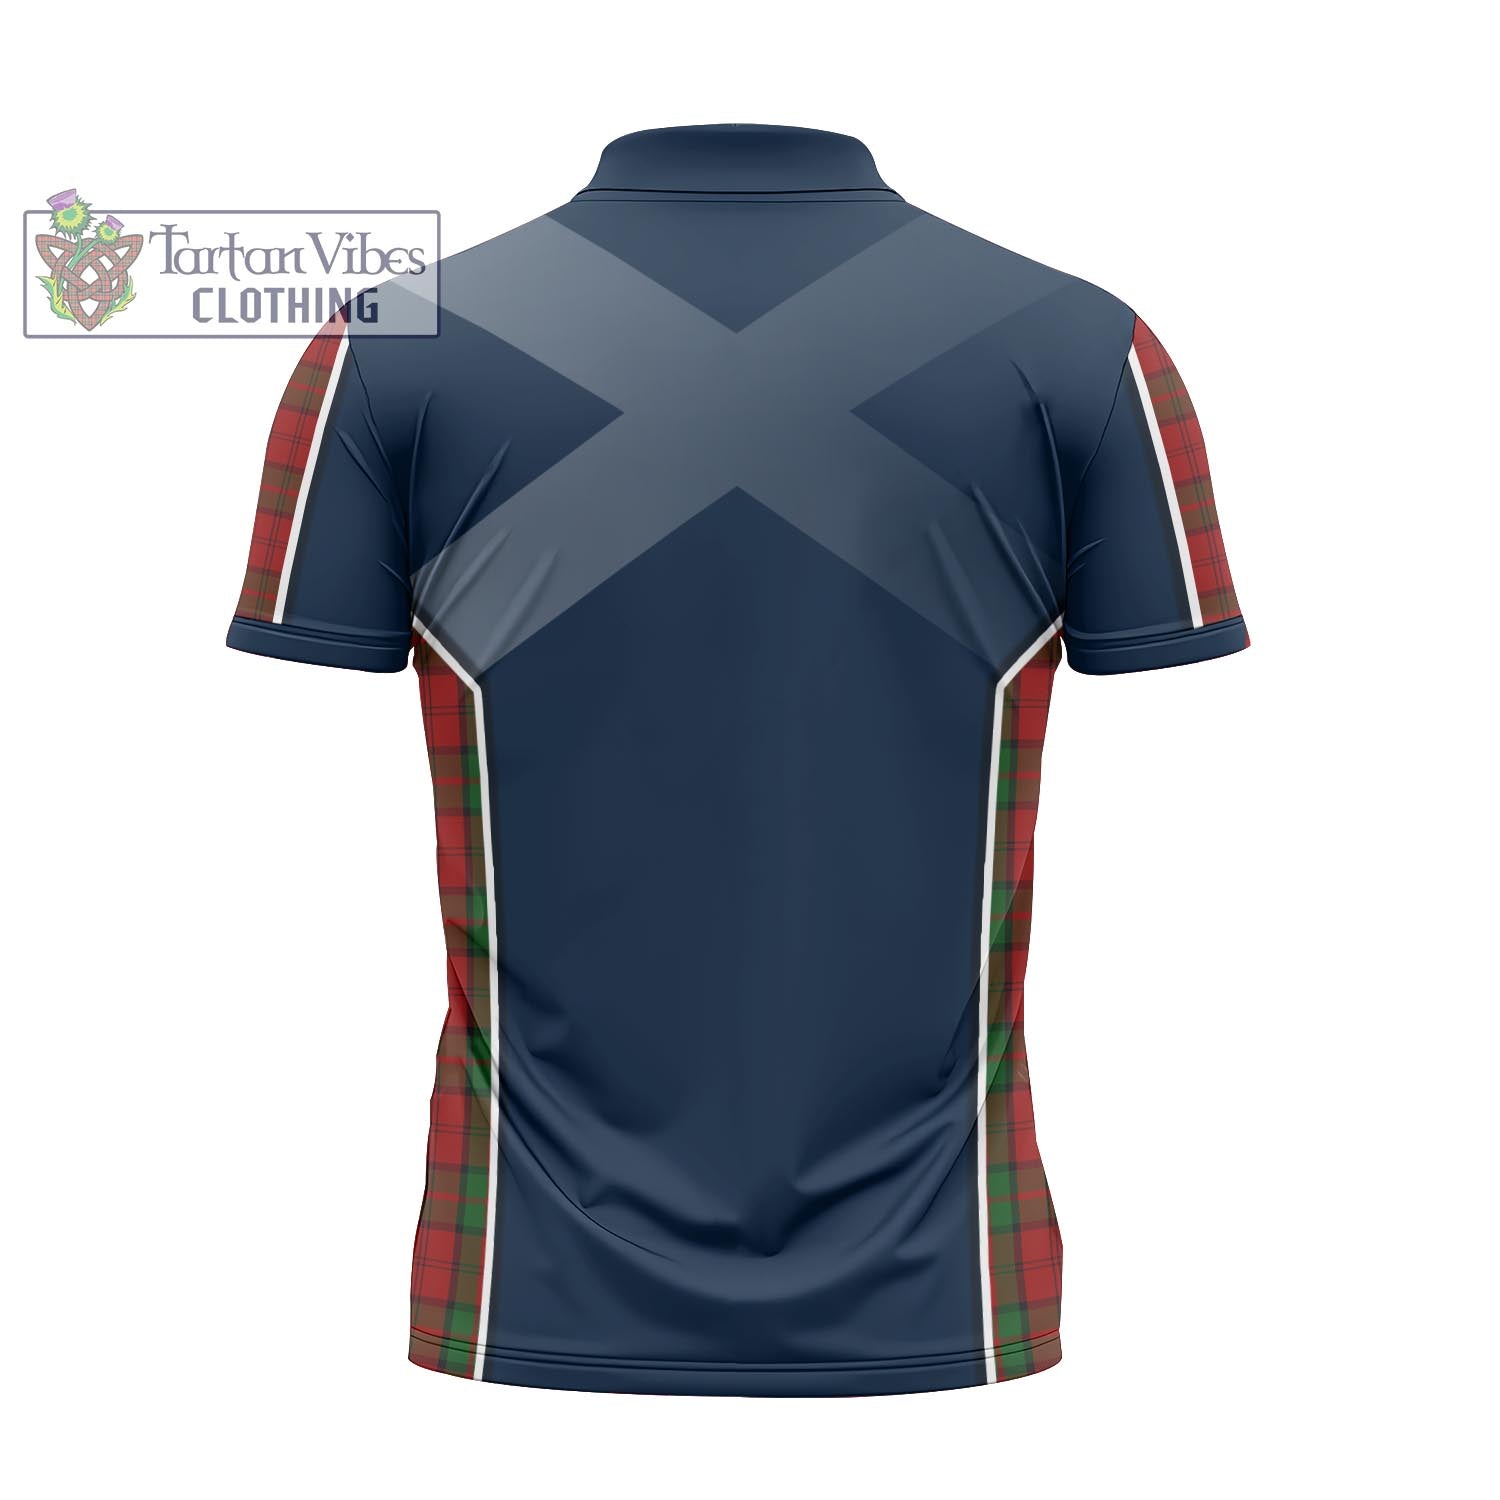 Tartan Vibes Clothing Dunbar Tartan Zipper Polo Shirt with Family Crest and Scottish Thistle Vibes Sport Style